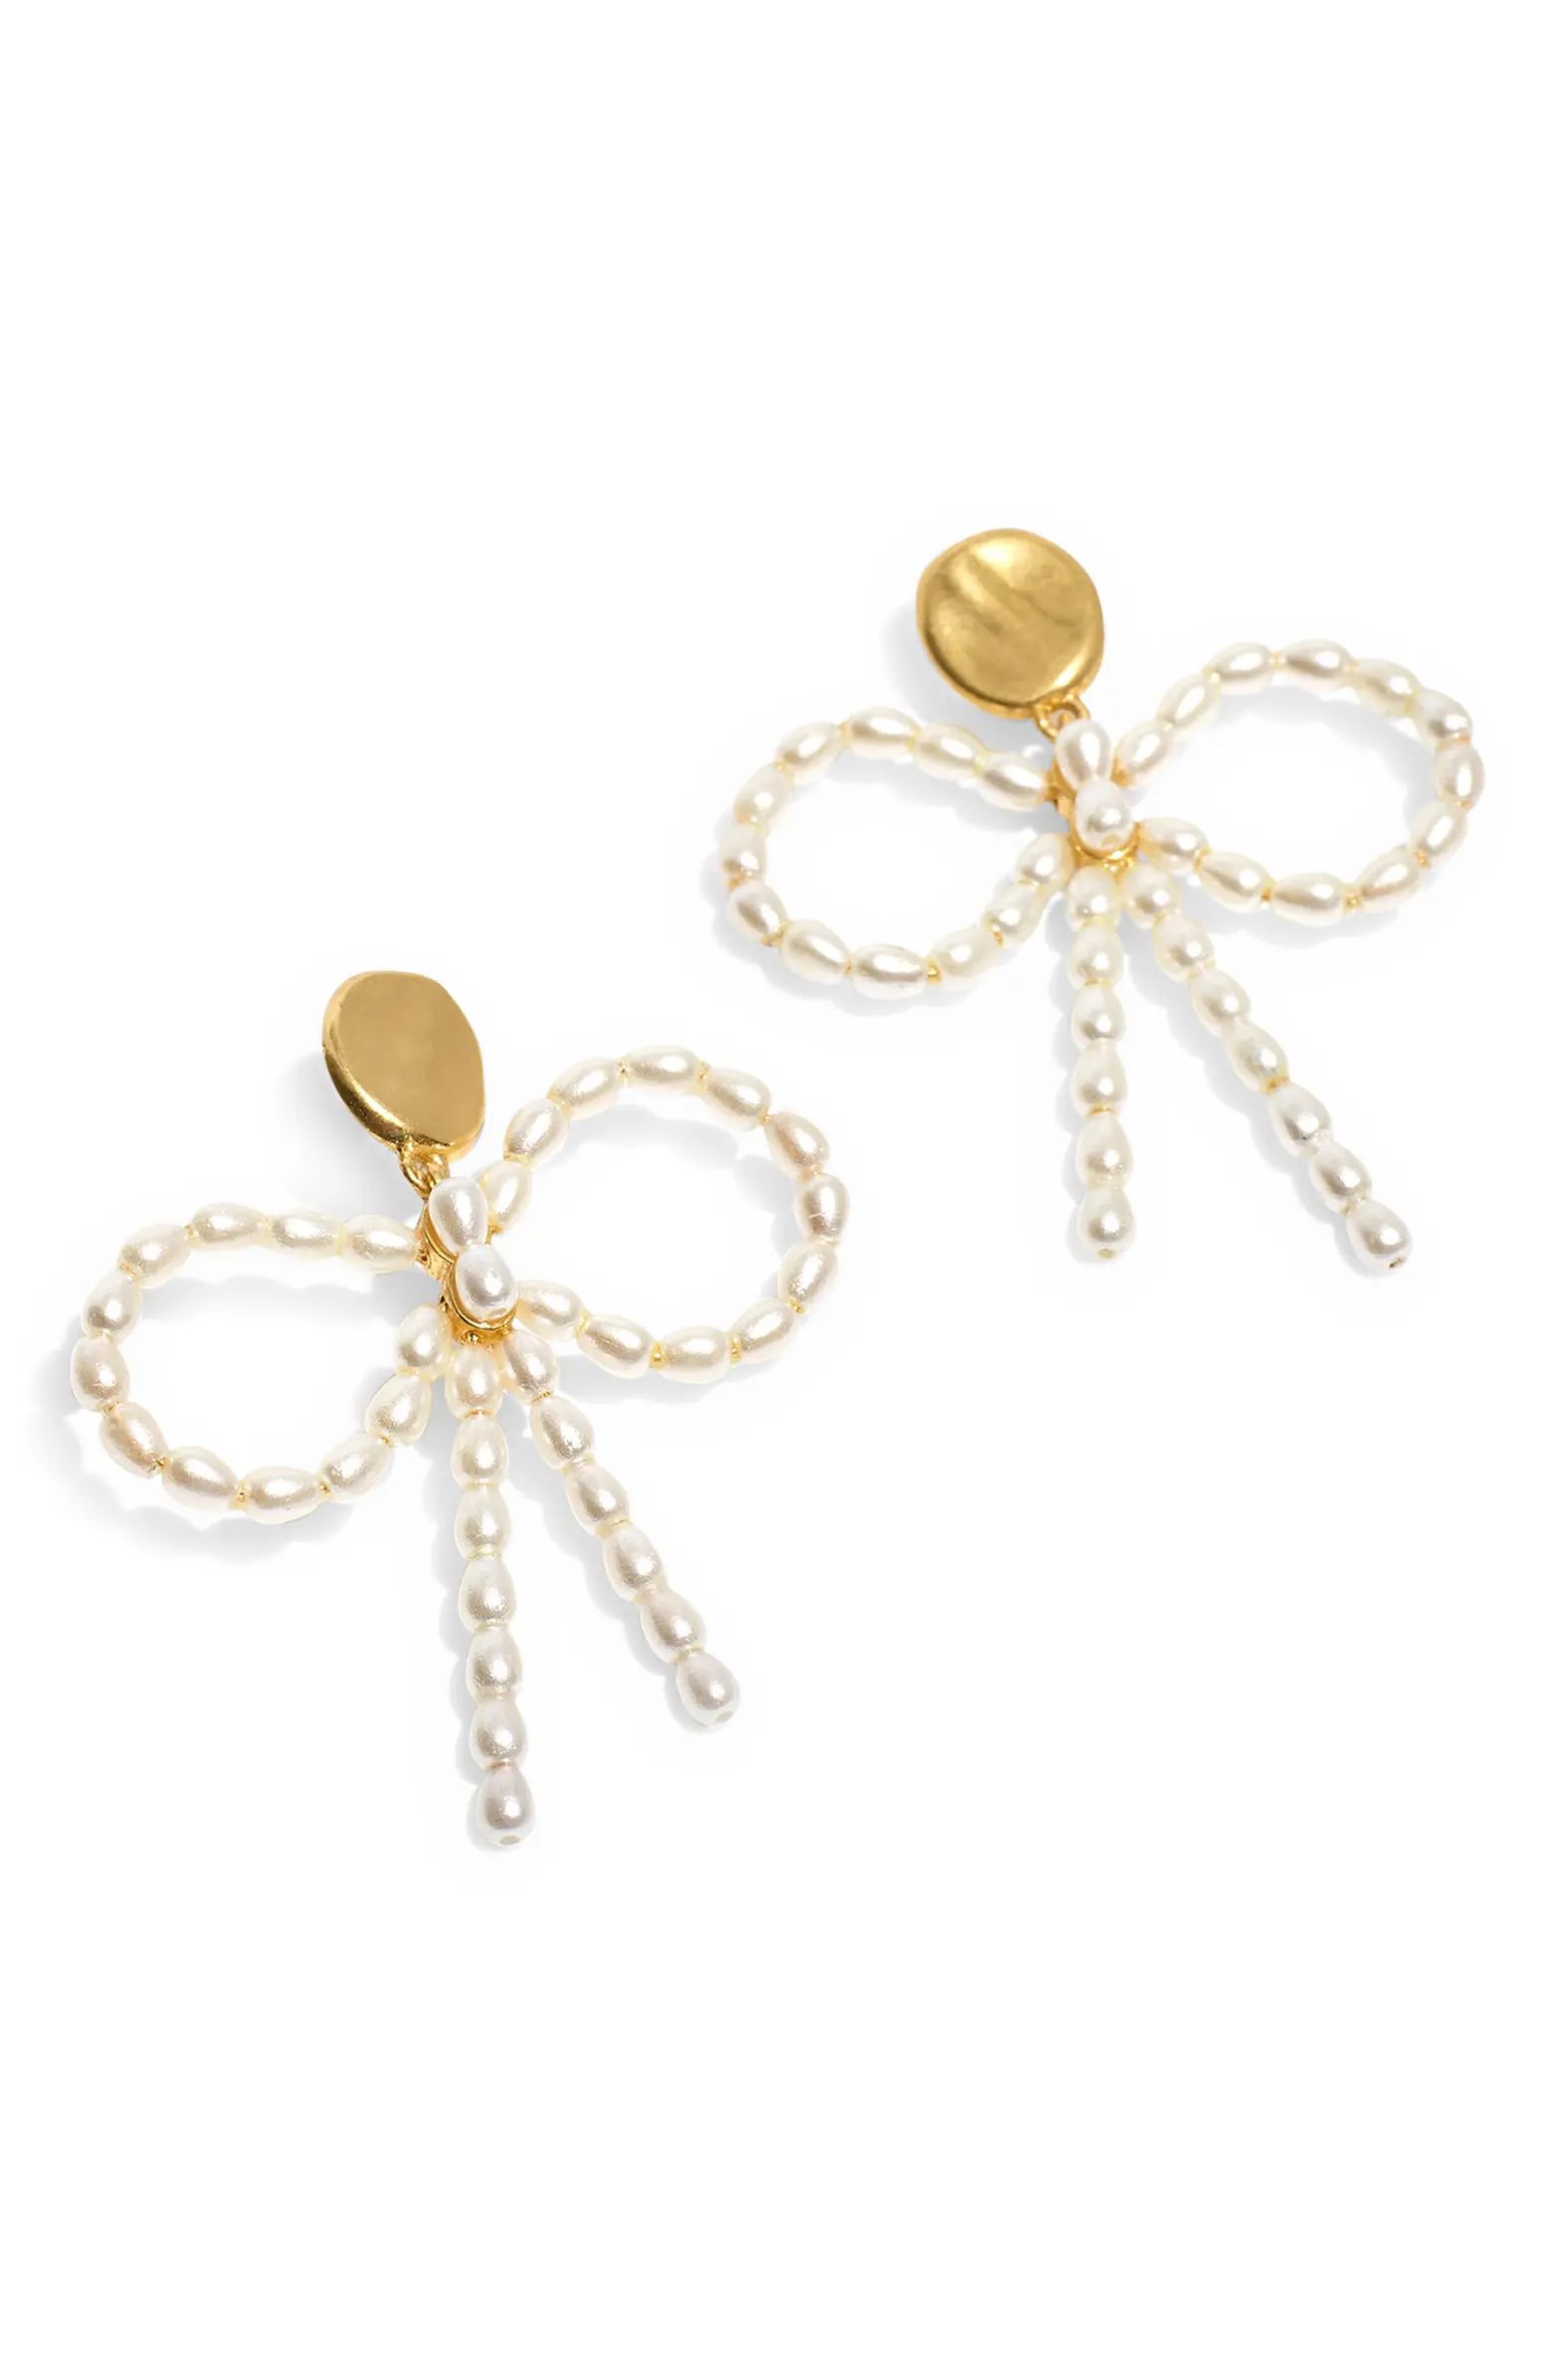 Freshwater & Imitation Pearl Bow Statement Earrings | Nordstrom